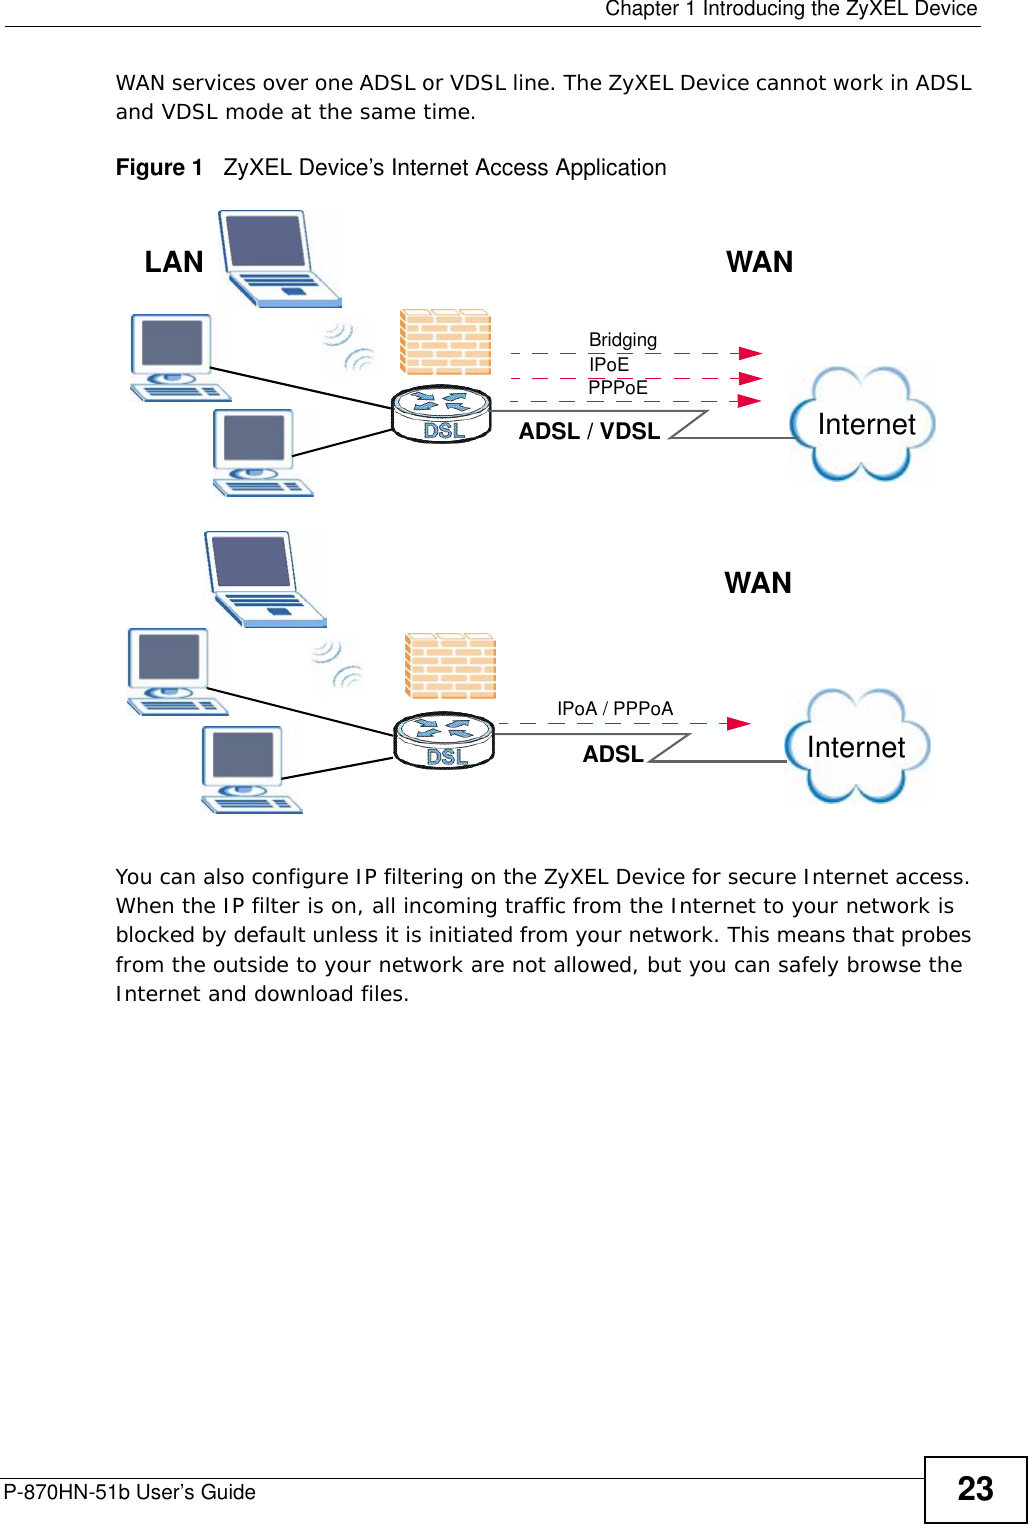  Chapter 1 Introducing the ZyXEL DeviceP-870HN-51b User’s Guide 23WAN services over one ADSL or VDSL line. The ZyXEL Device cannot work in ADSL and VDSL mode at the same time.Figure 1   ZyXEL Device’s Internet Access ApplicationYou can also configure IP filtering on the ZyXEL Device for secure Internet access. When the IP filter is on, all incoming traffic from the Internet to your network is blocked by default unless it is initiated from your network. This means that probes from the outside to your network are not allowed, but you can safely browse the Internet and download files.InternetADSL / VDSLLANPPPoEIPoEBridgingWANInternetADSLIPoA / PPPoAWAN